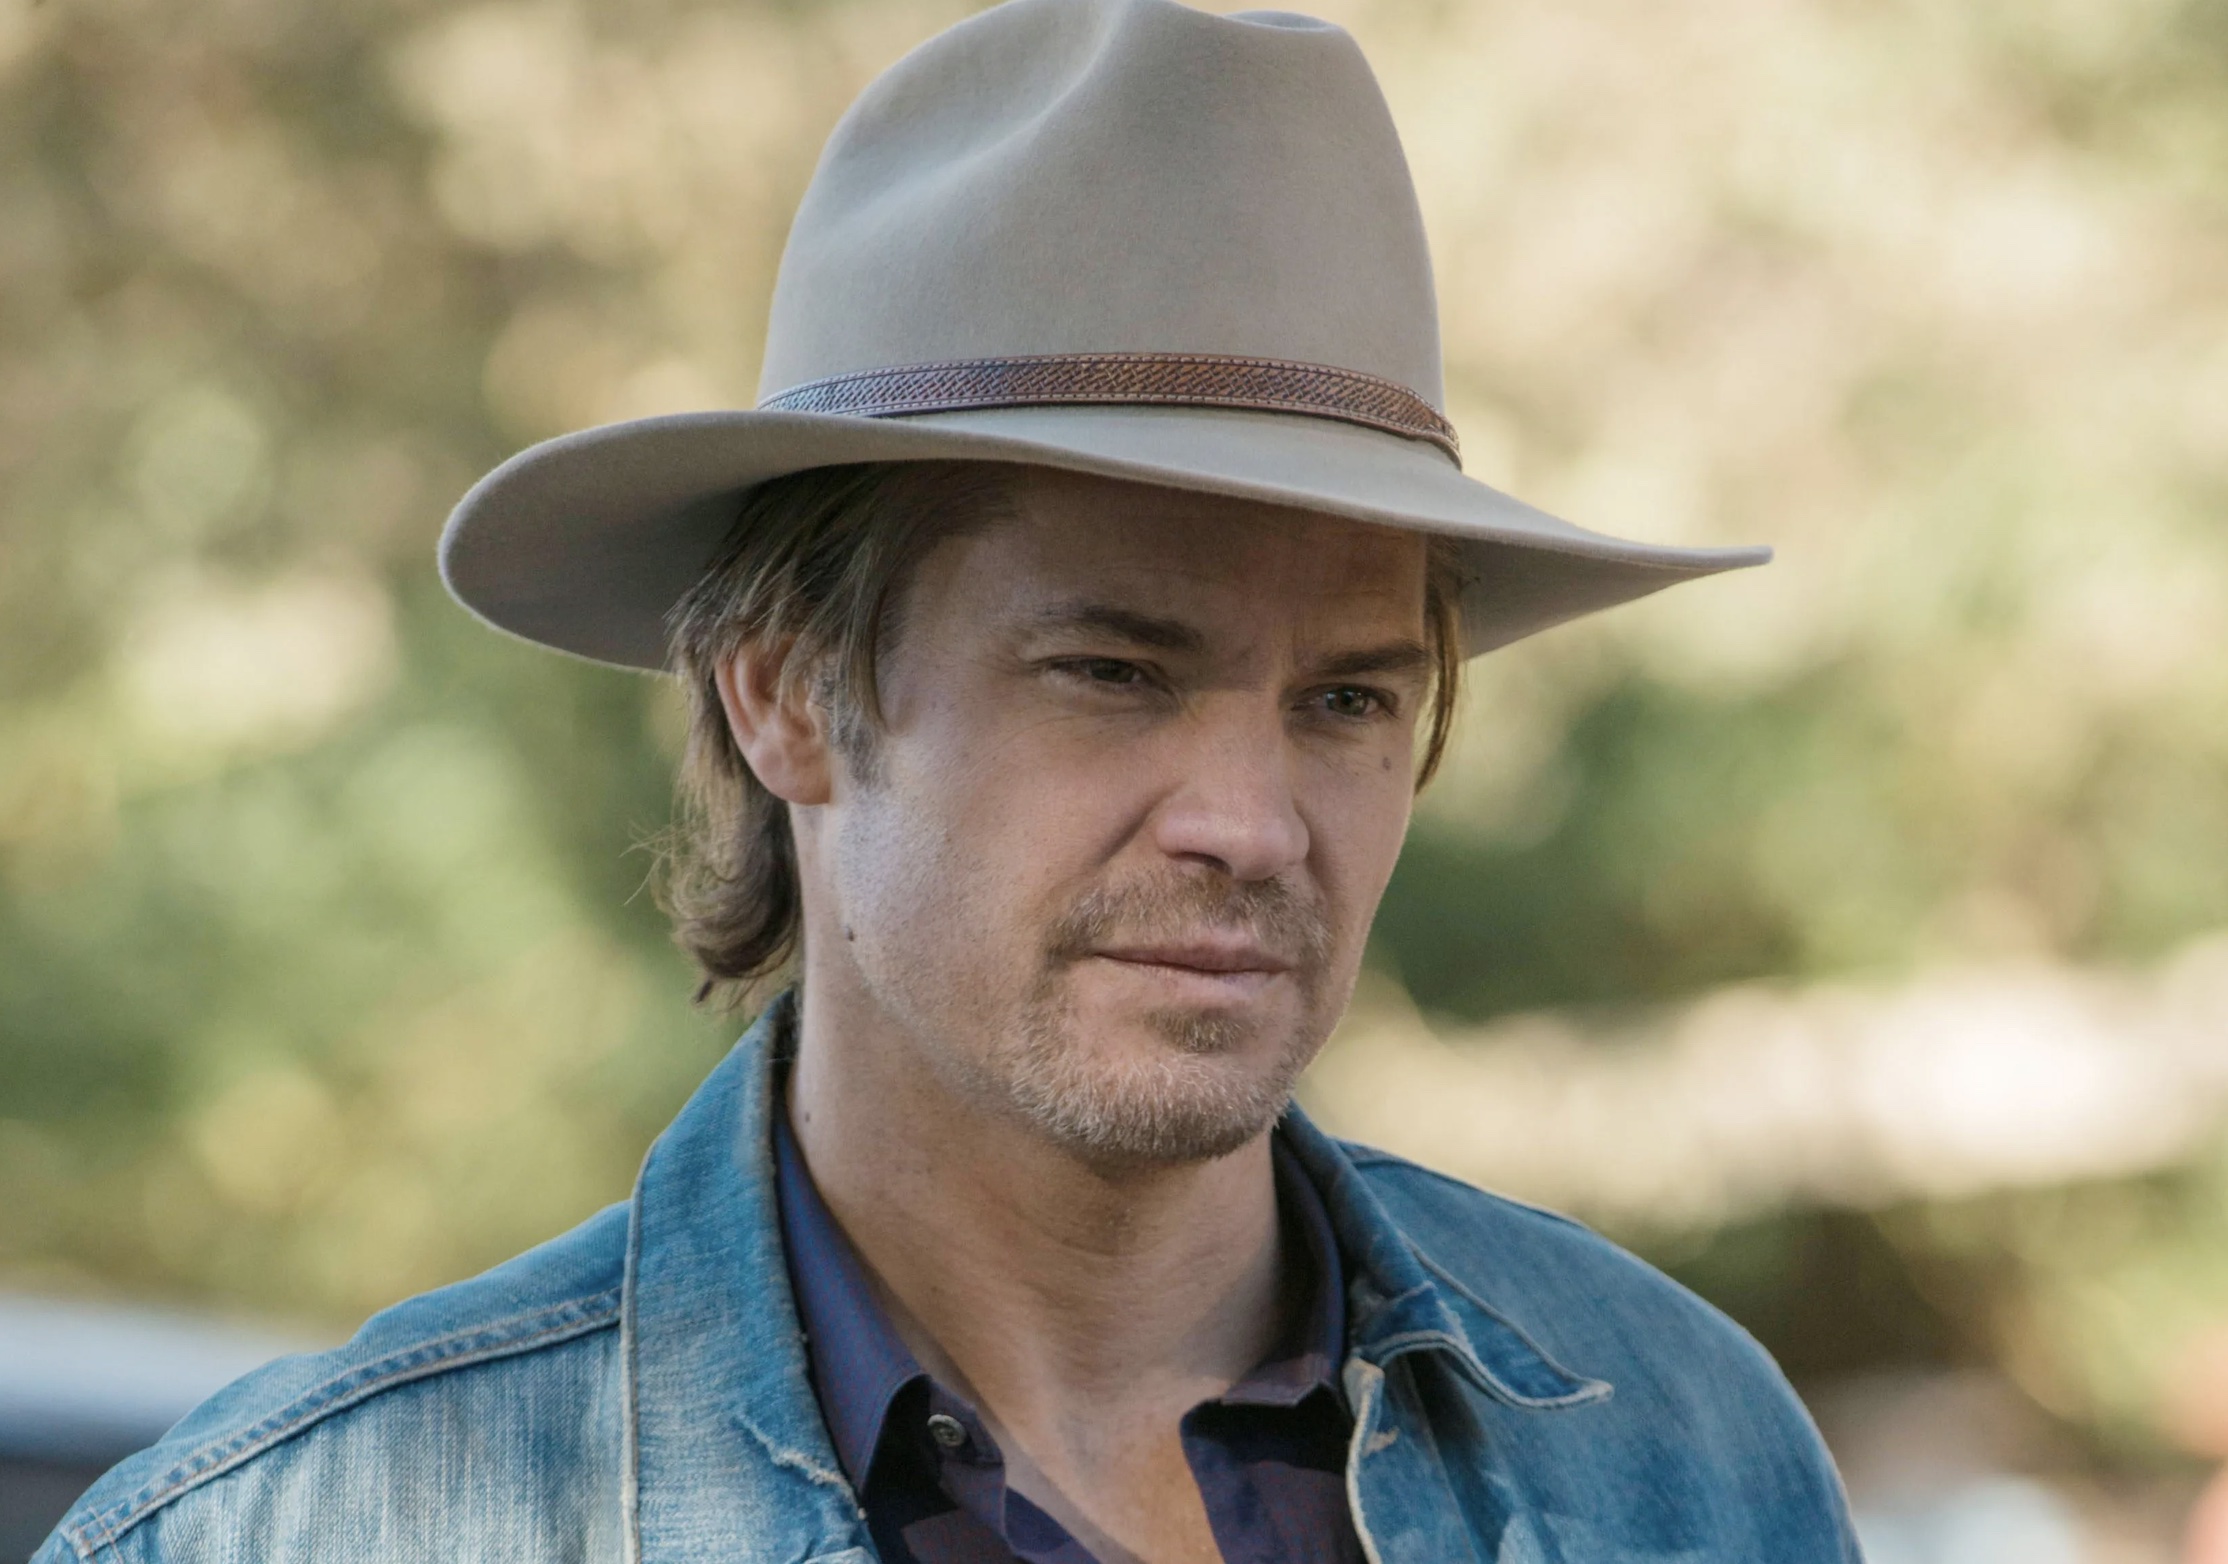 Justified Cast on FX and Hulu - Timothy Olyphant as Raylan Givens